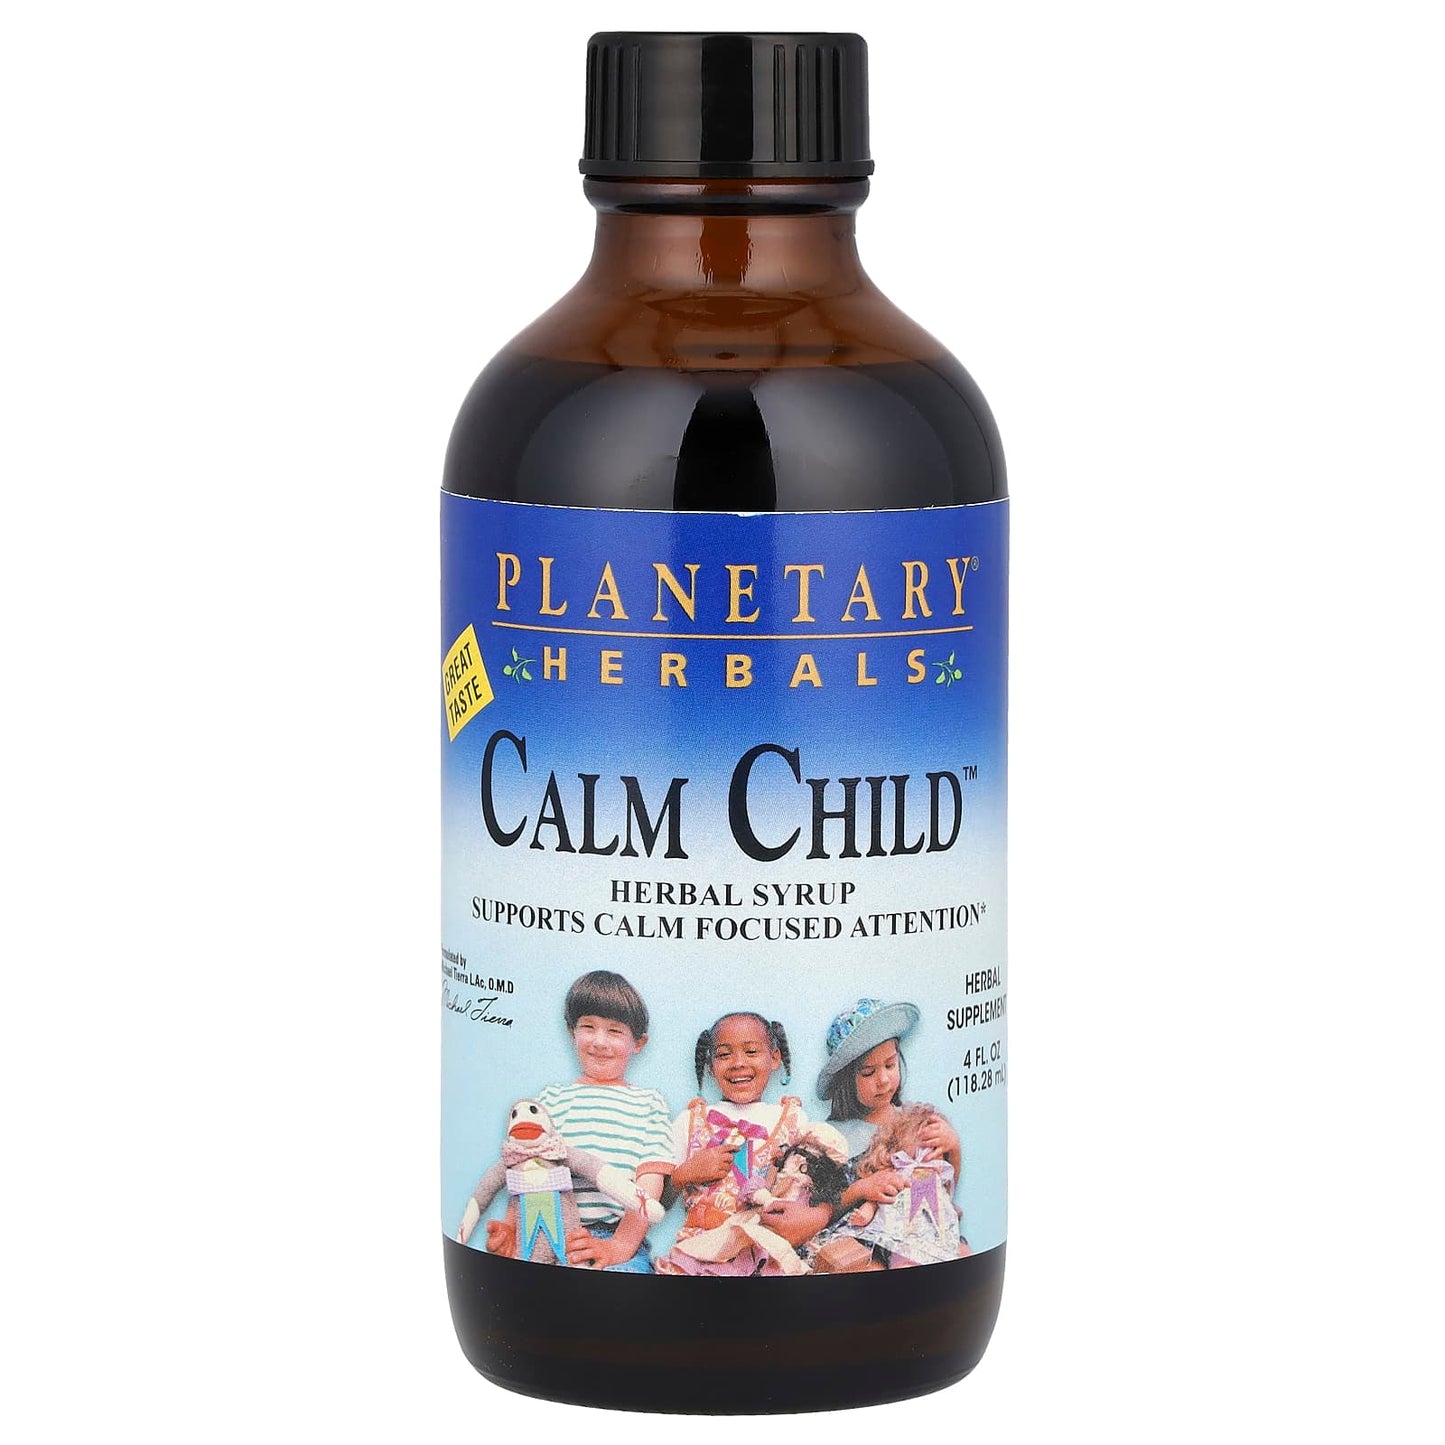 Planetary Herbals Calm Child Herbal Syrup